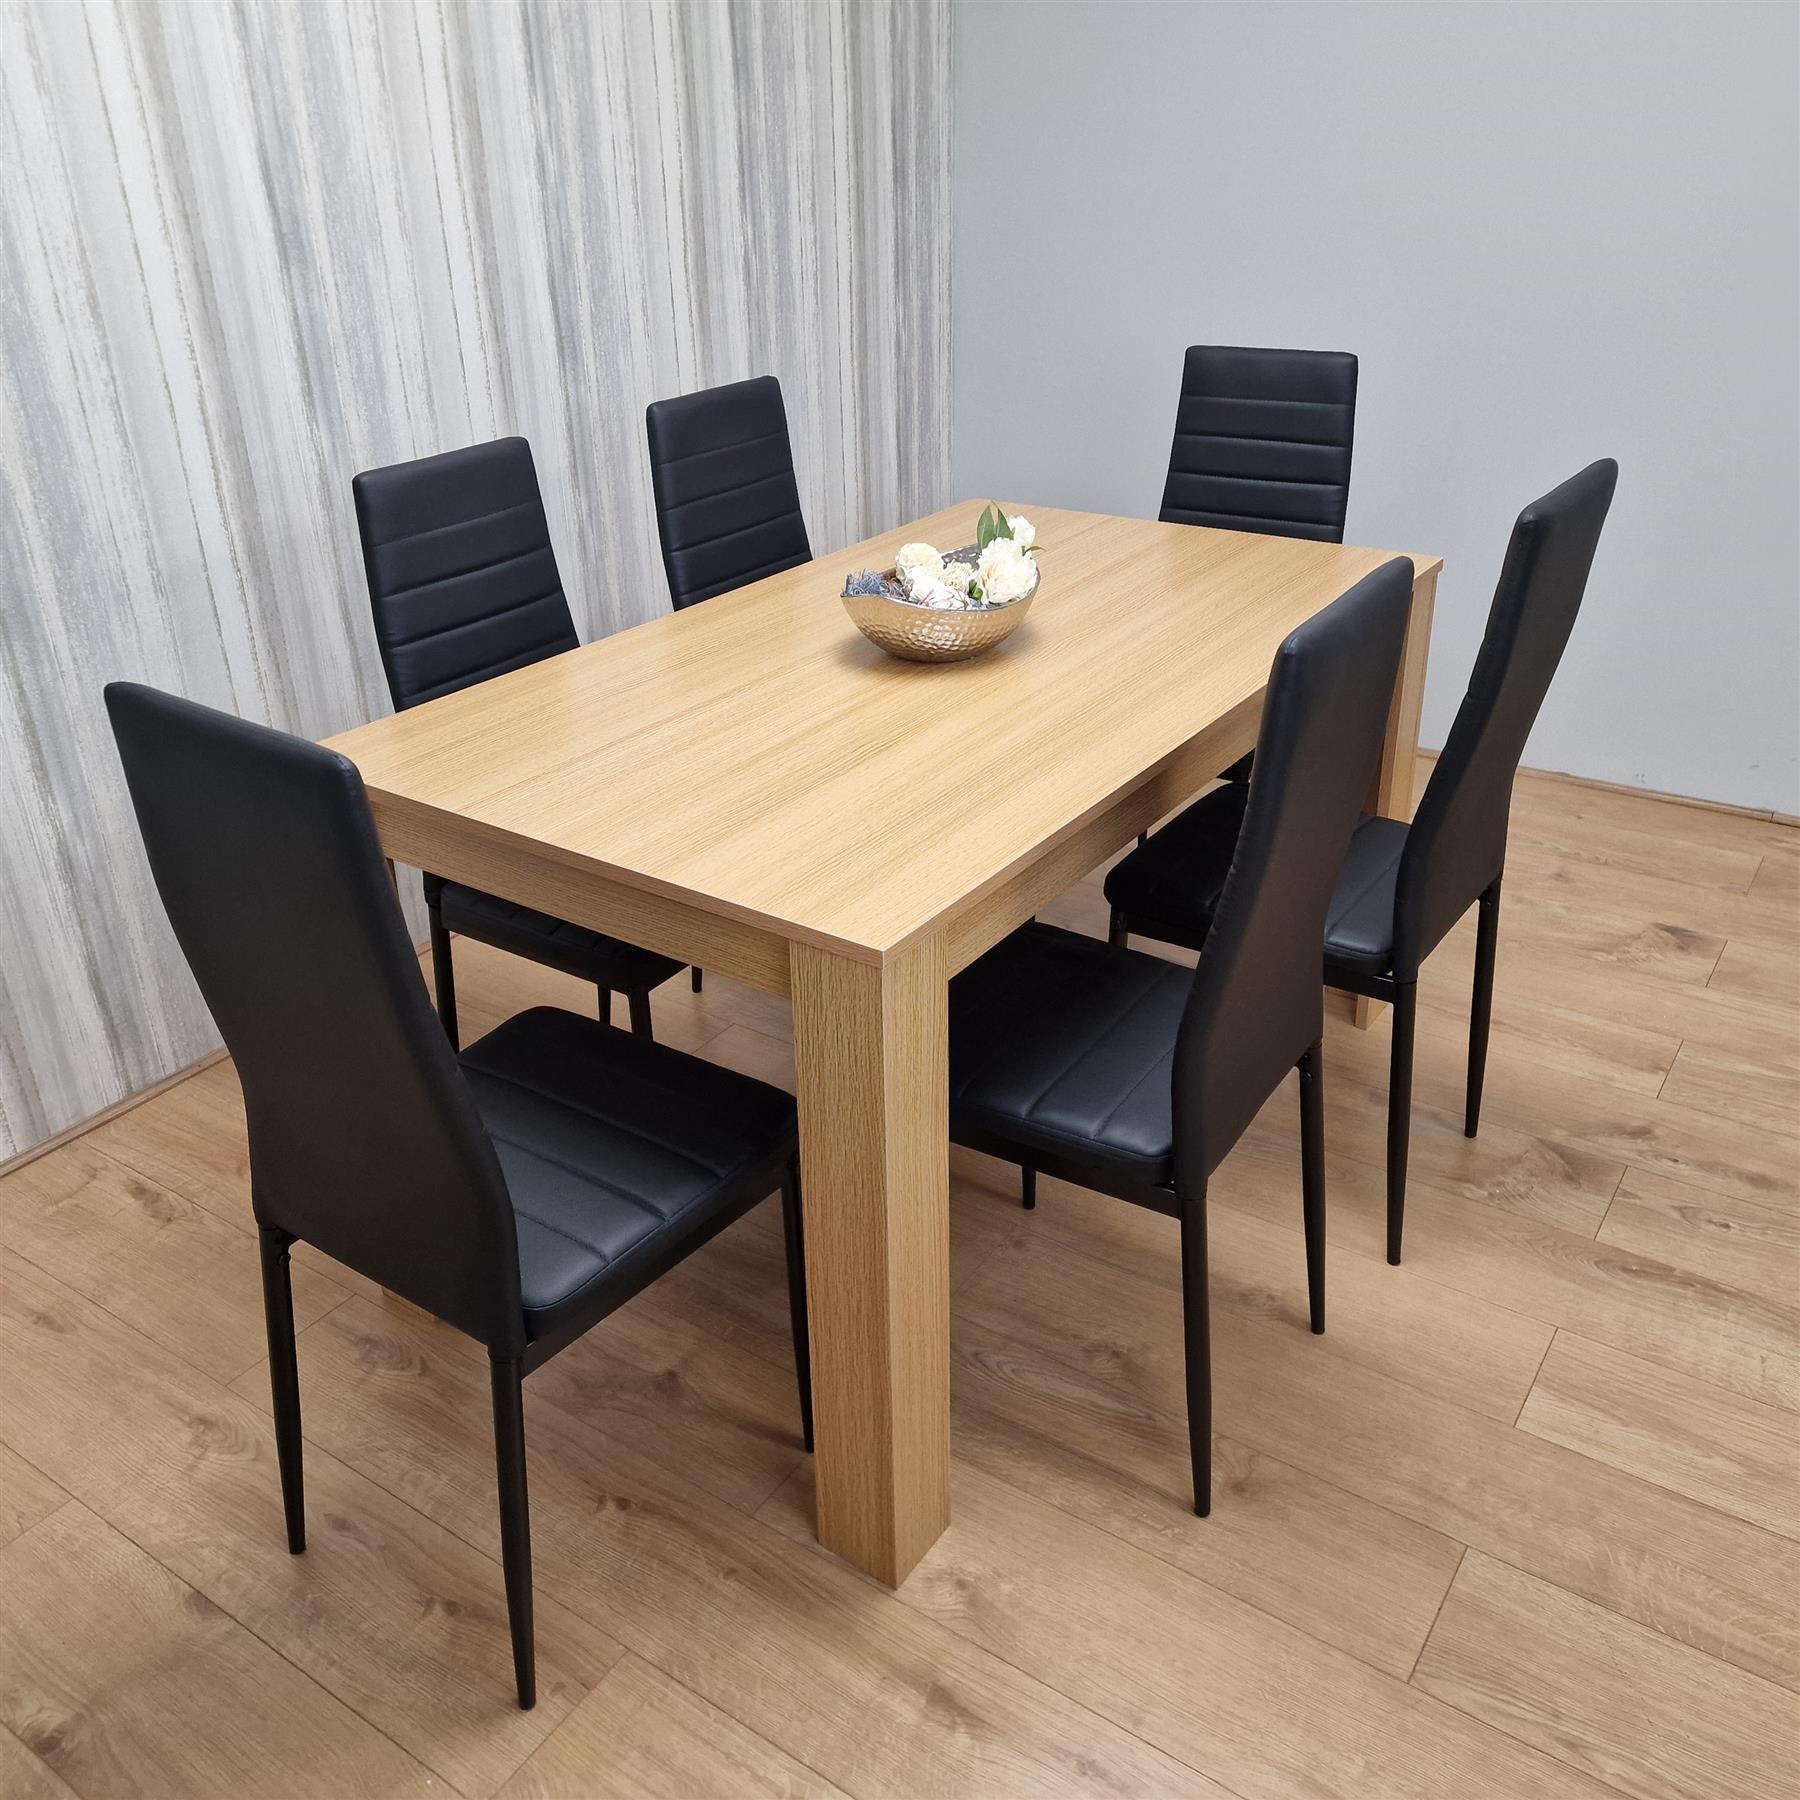 Dining Set of 6 Dining Table and 6 Black Faux leather Chairs Dinig Room Furniture